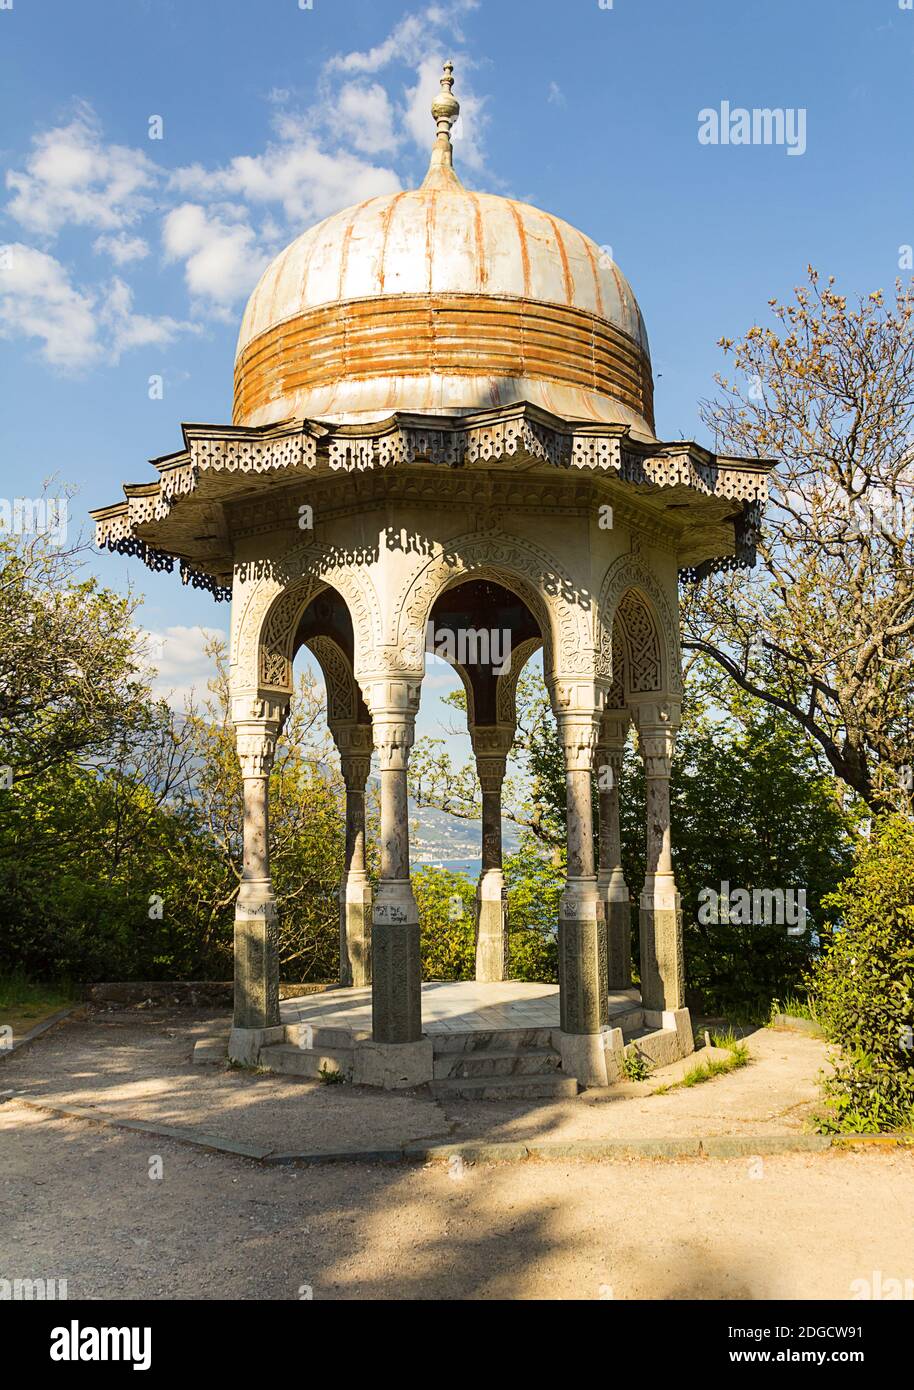 Open graceful stone gazebo pavilion with carved walls and a round roof- Yalta Crimea Stock Photo